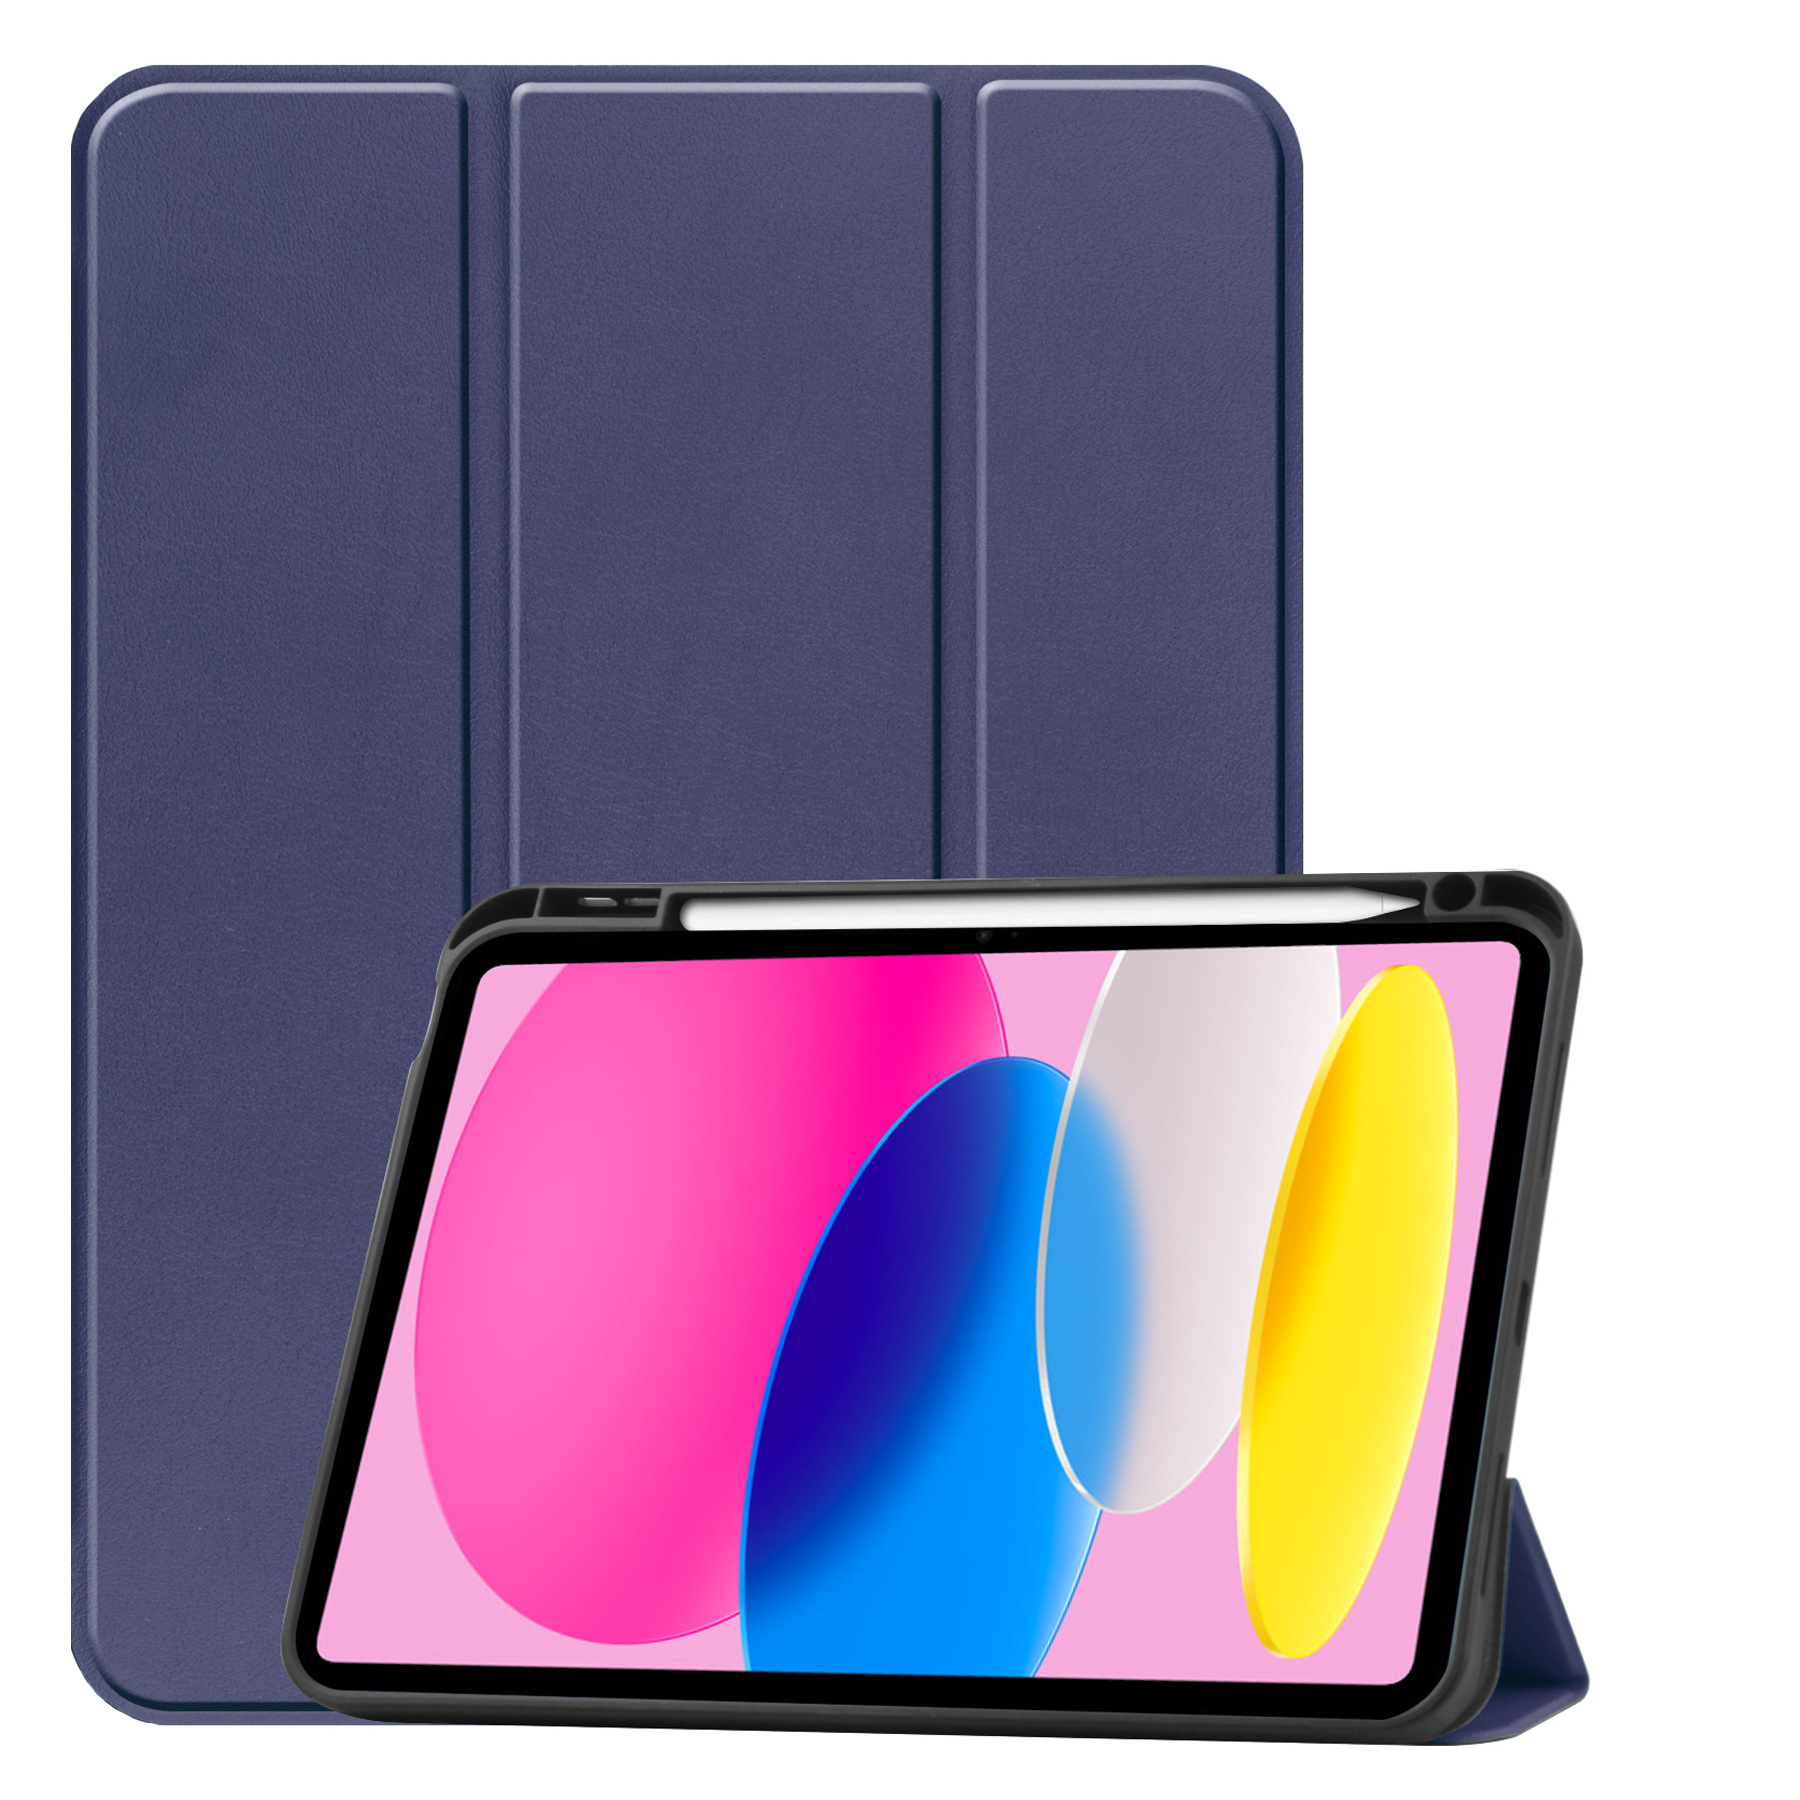 iPad 2022 Hoesje Book Case Hard Cover Hoes Met Uitsparing Apple Pencil - iPad 10 Hoes Hardcover - Donker Blauw